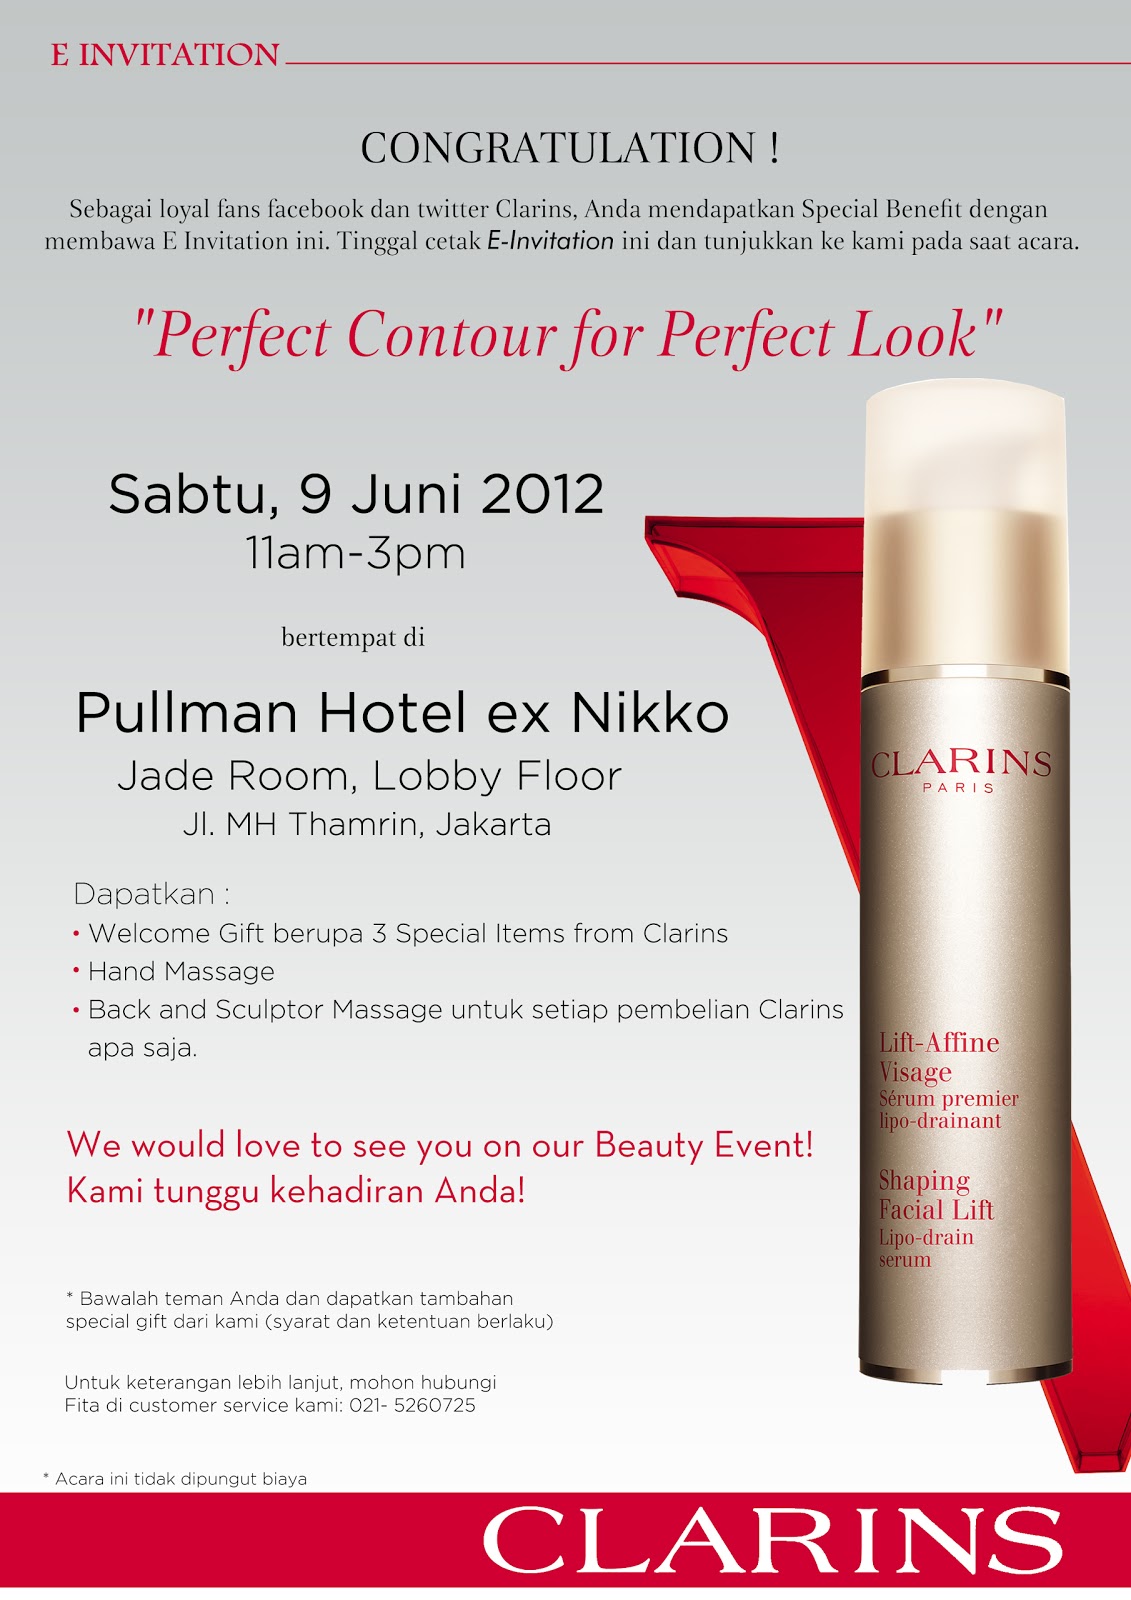 Event: Clarins "Perfect Contour for Perfect Look" - Two Thousand Things